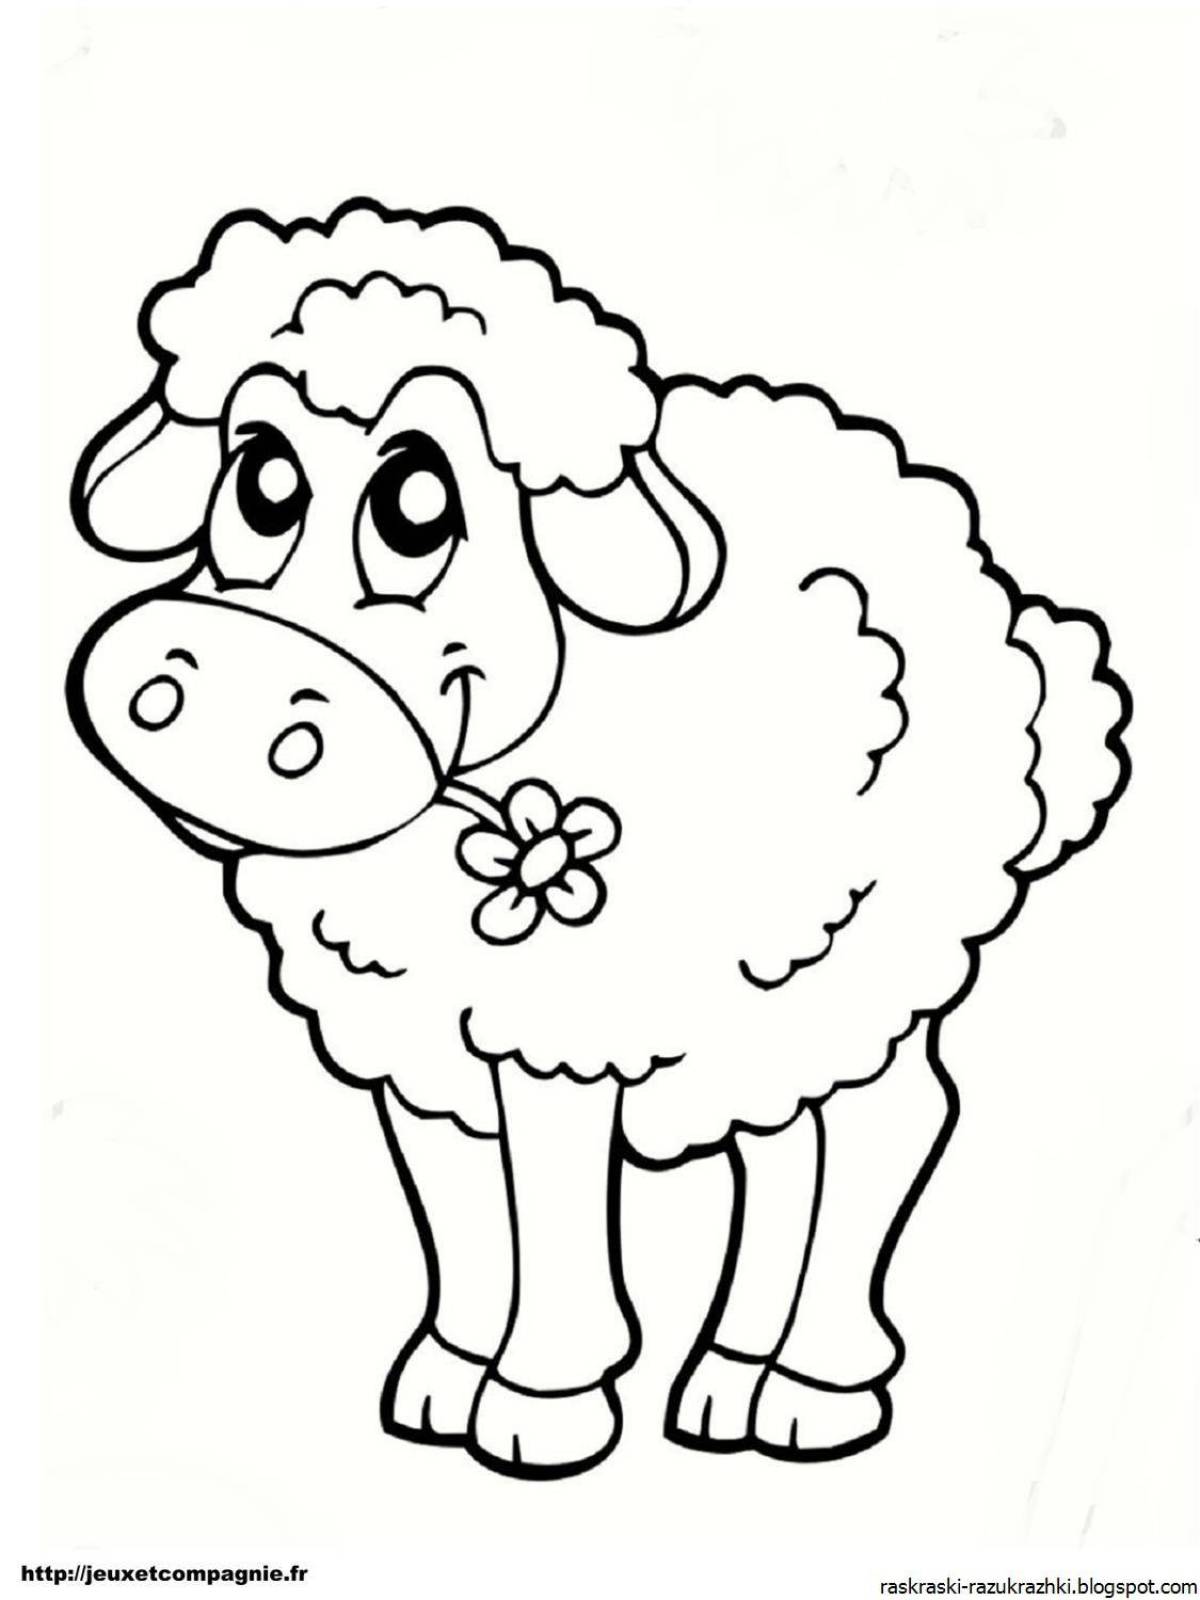 Radiant Sheep Coloring Page for Kids